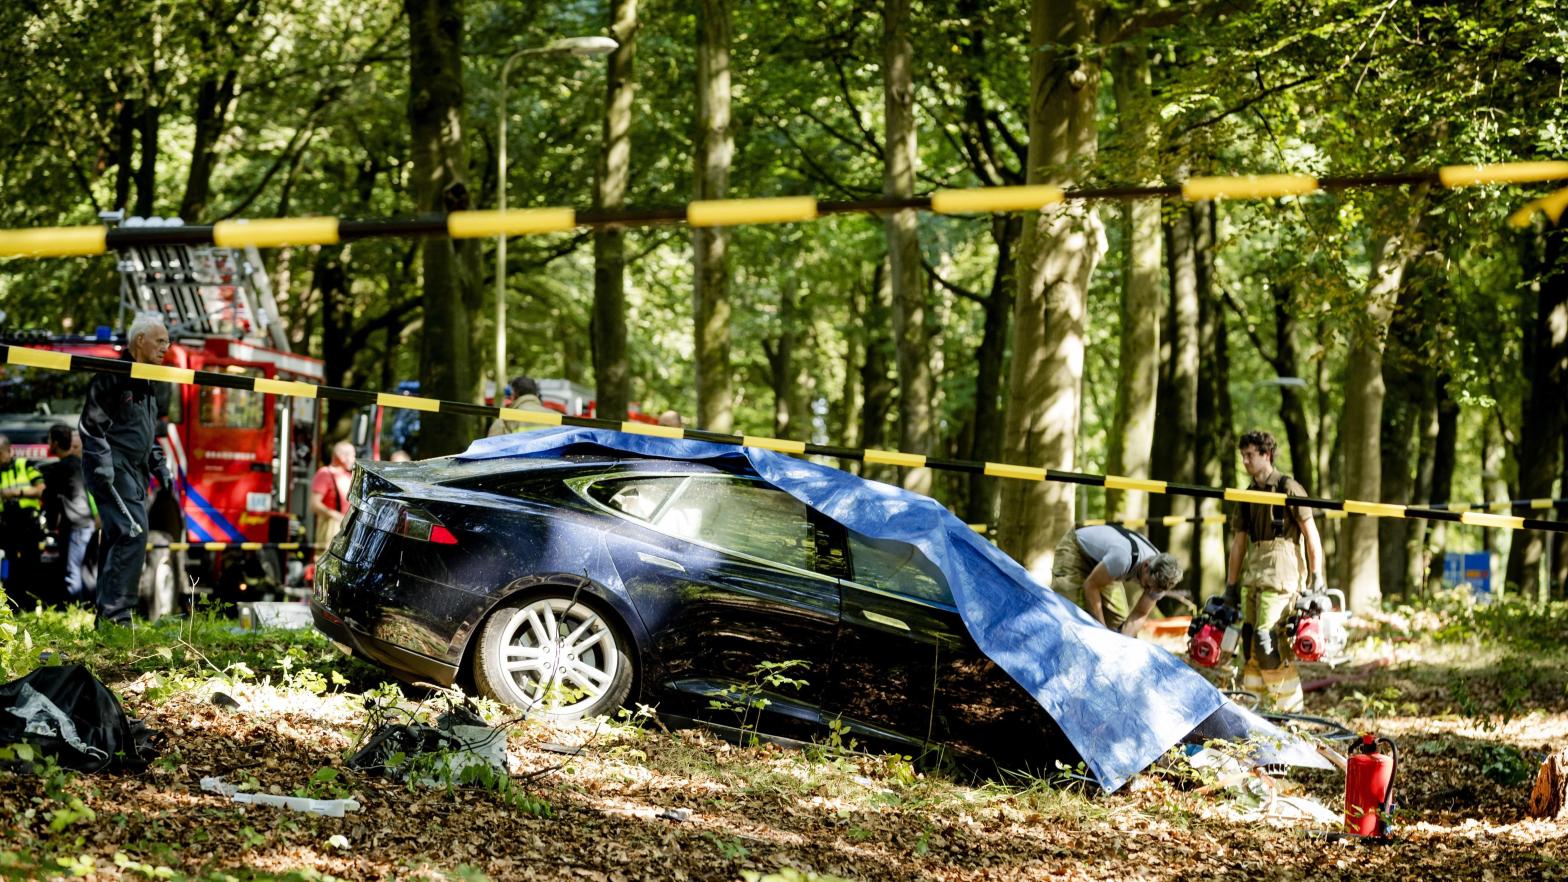 Rescue workers proceed with caution around the spot where a Tesla slammed into a tree in Baarn, on September 7, 2016.  (Photo: Robin Vaan Lonkhuijsen, Getty Images)